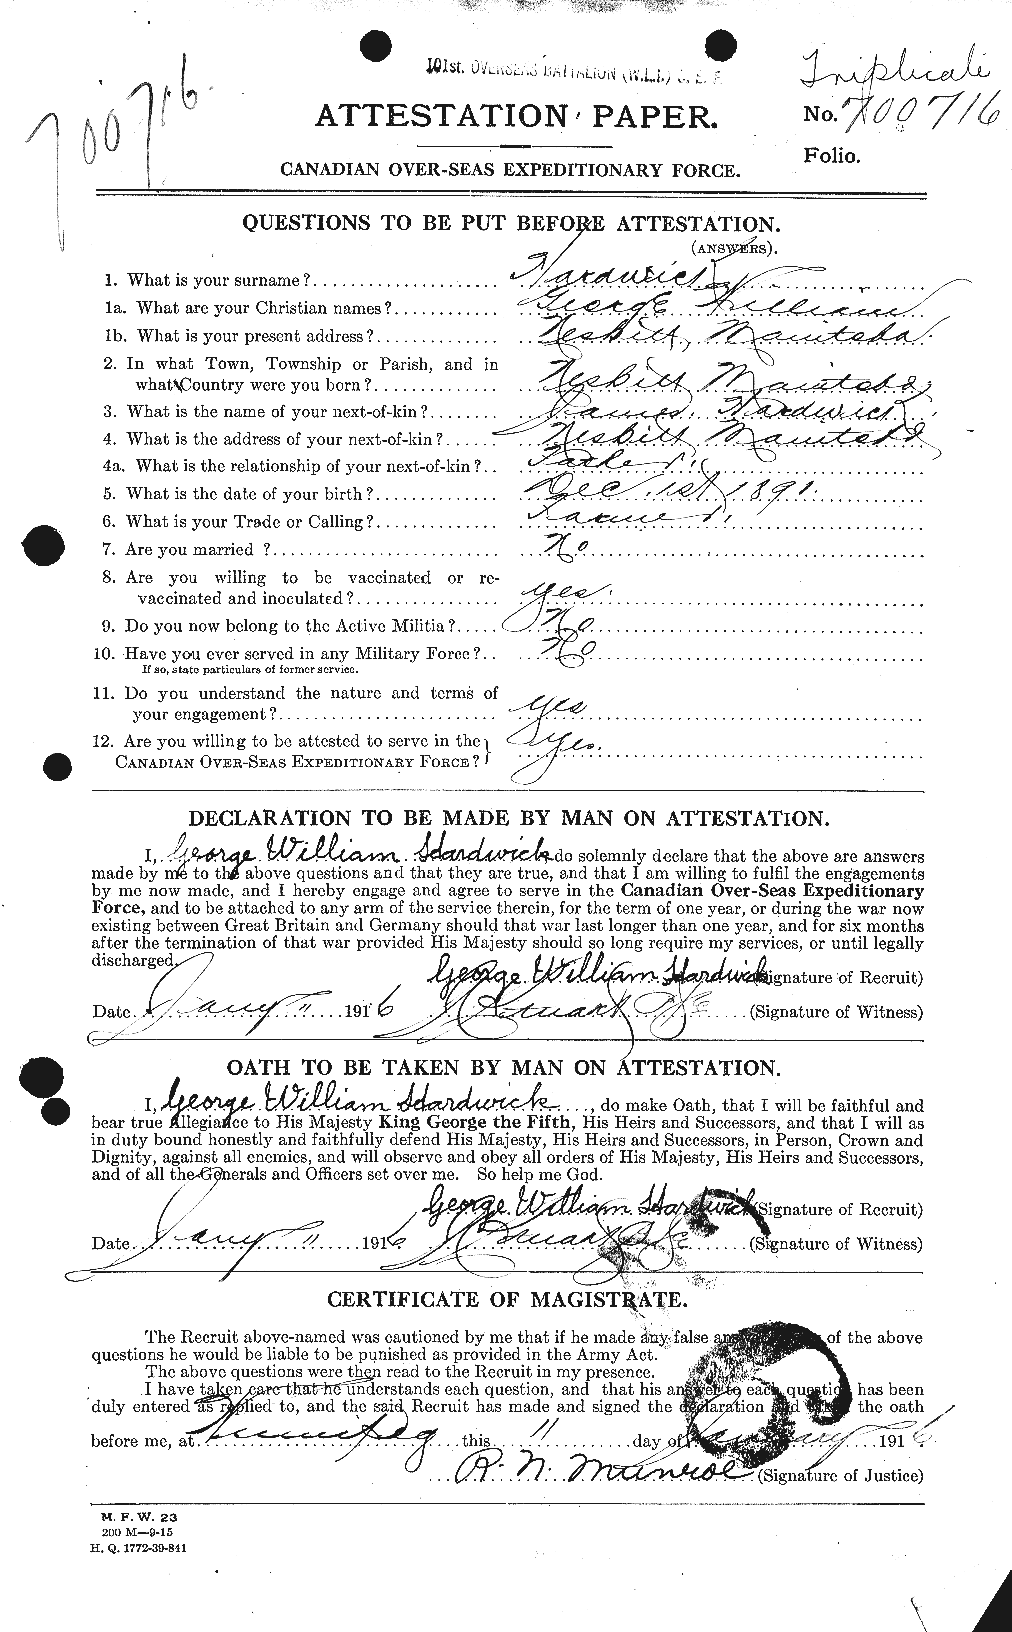 Personnel Records of the First World War - CEF 376553a